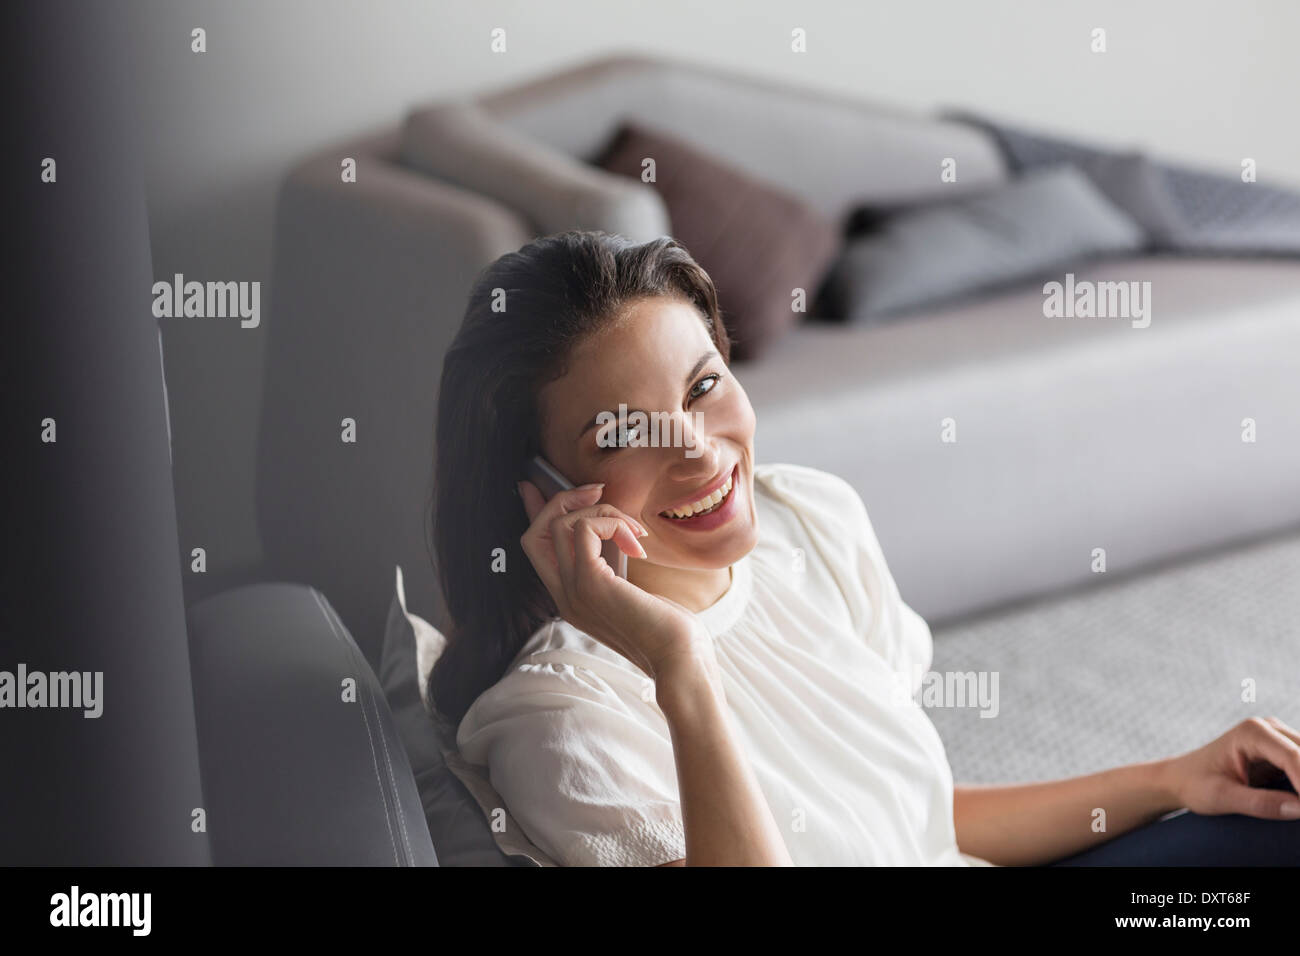 Portrait of Woman talking on cell phone Banque D'Images